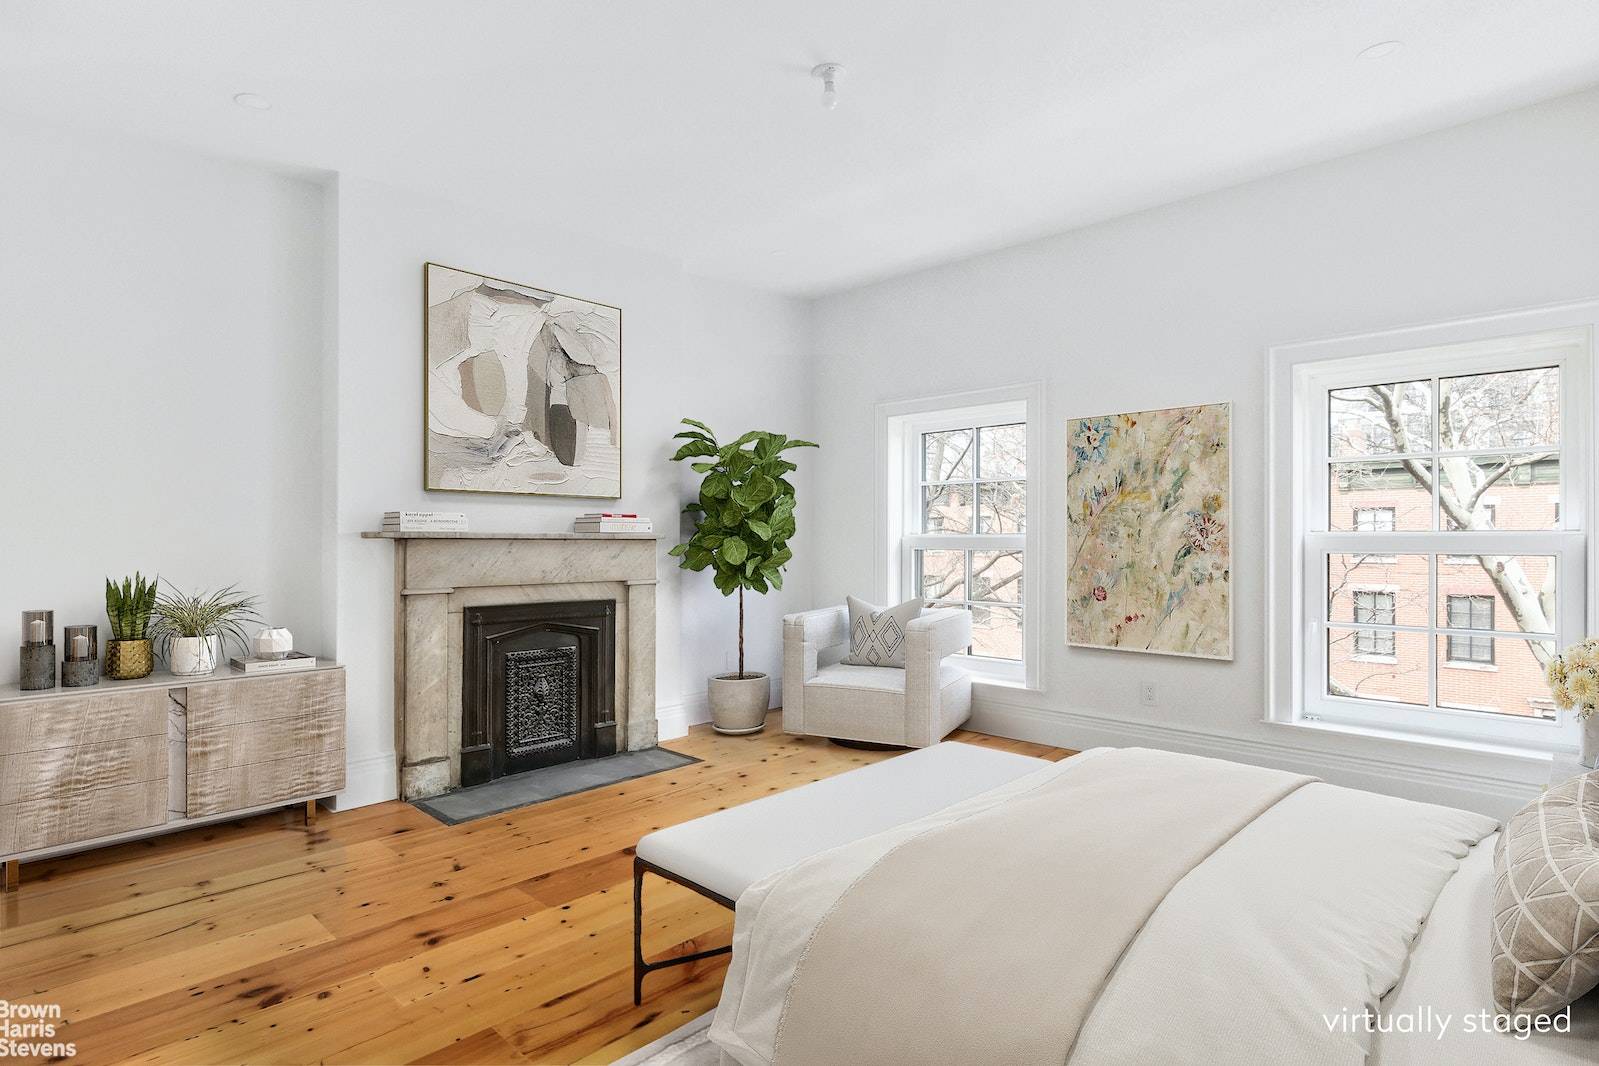 Just renovated, this brownstone upper duplex apartment, with ultra high end finishes, on a landmarked Boerum Hill block, leaves the rest of the competition gasping for air.